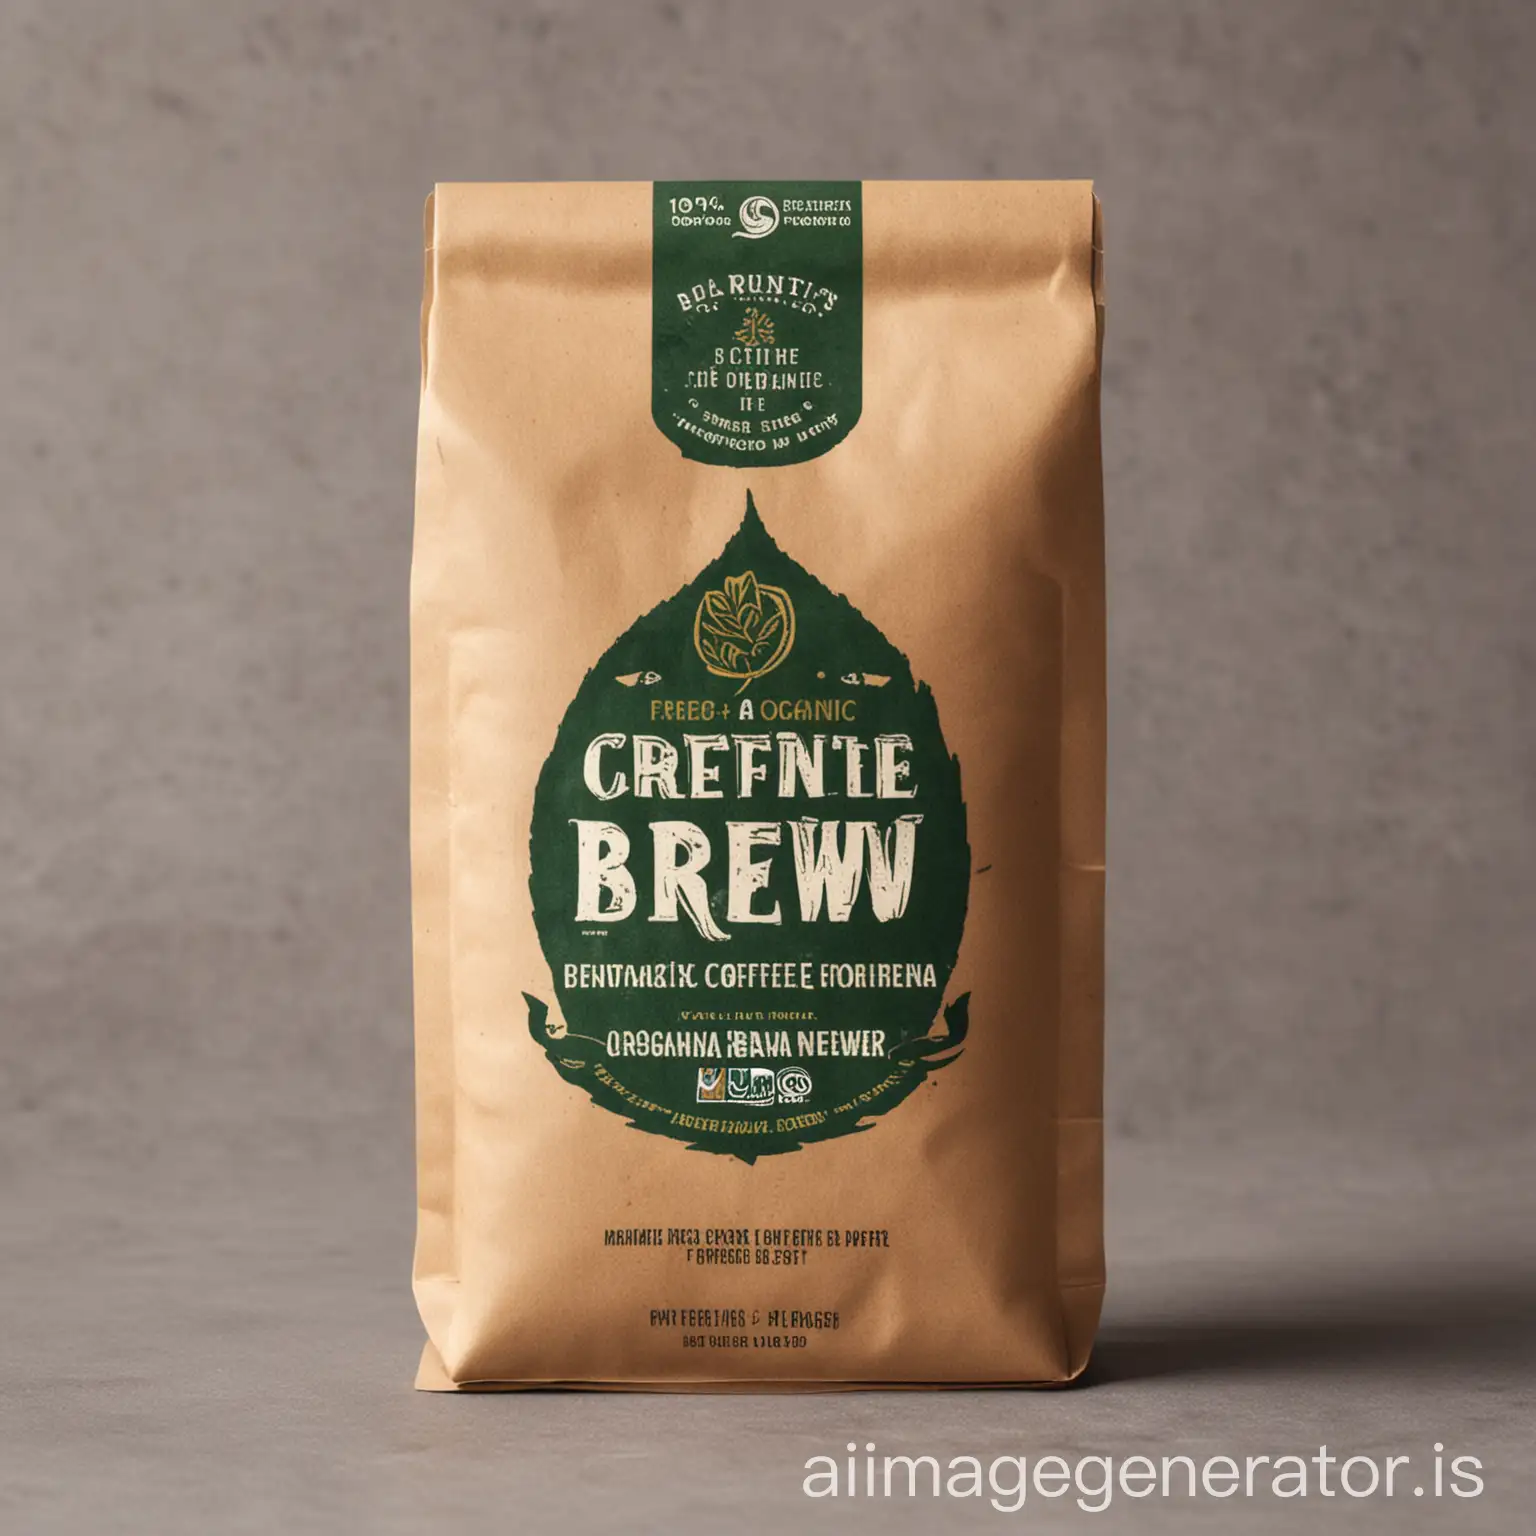 Create a packet of organic coffee powder packet labelled as Evergreen Brew 100% organic.